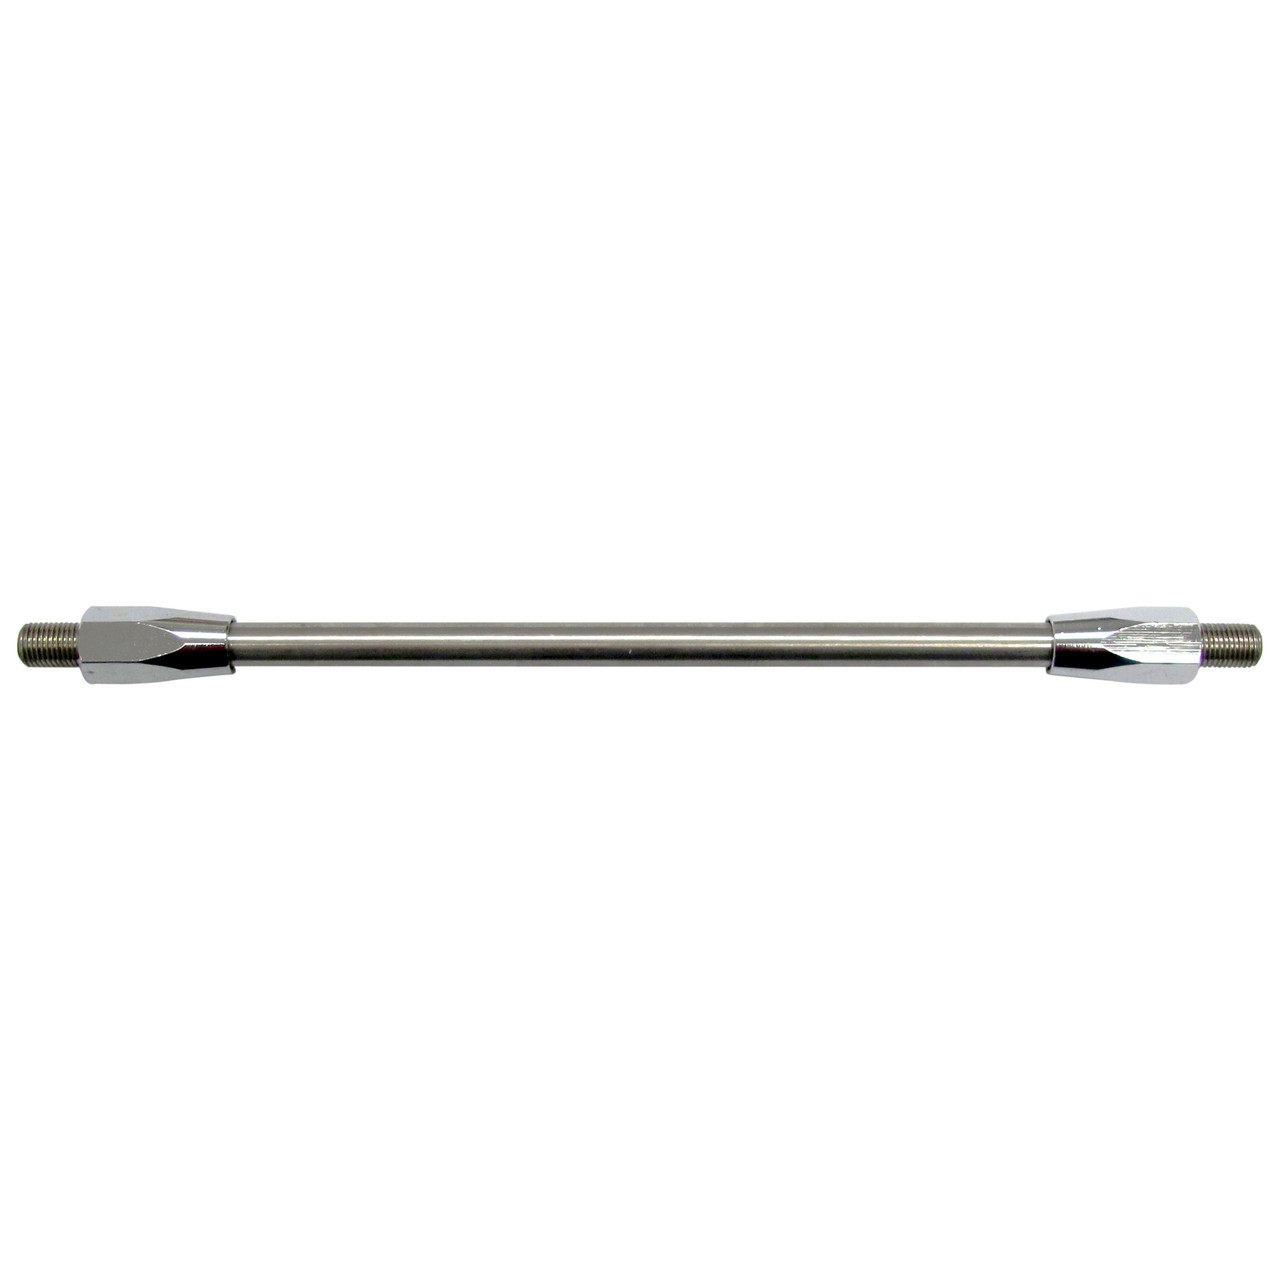 18-Inch - 3/8 x 24T Stainless Steel Antenna Mast Extension